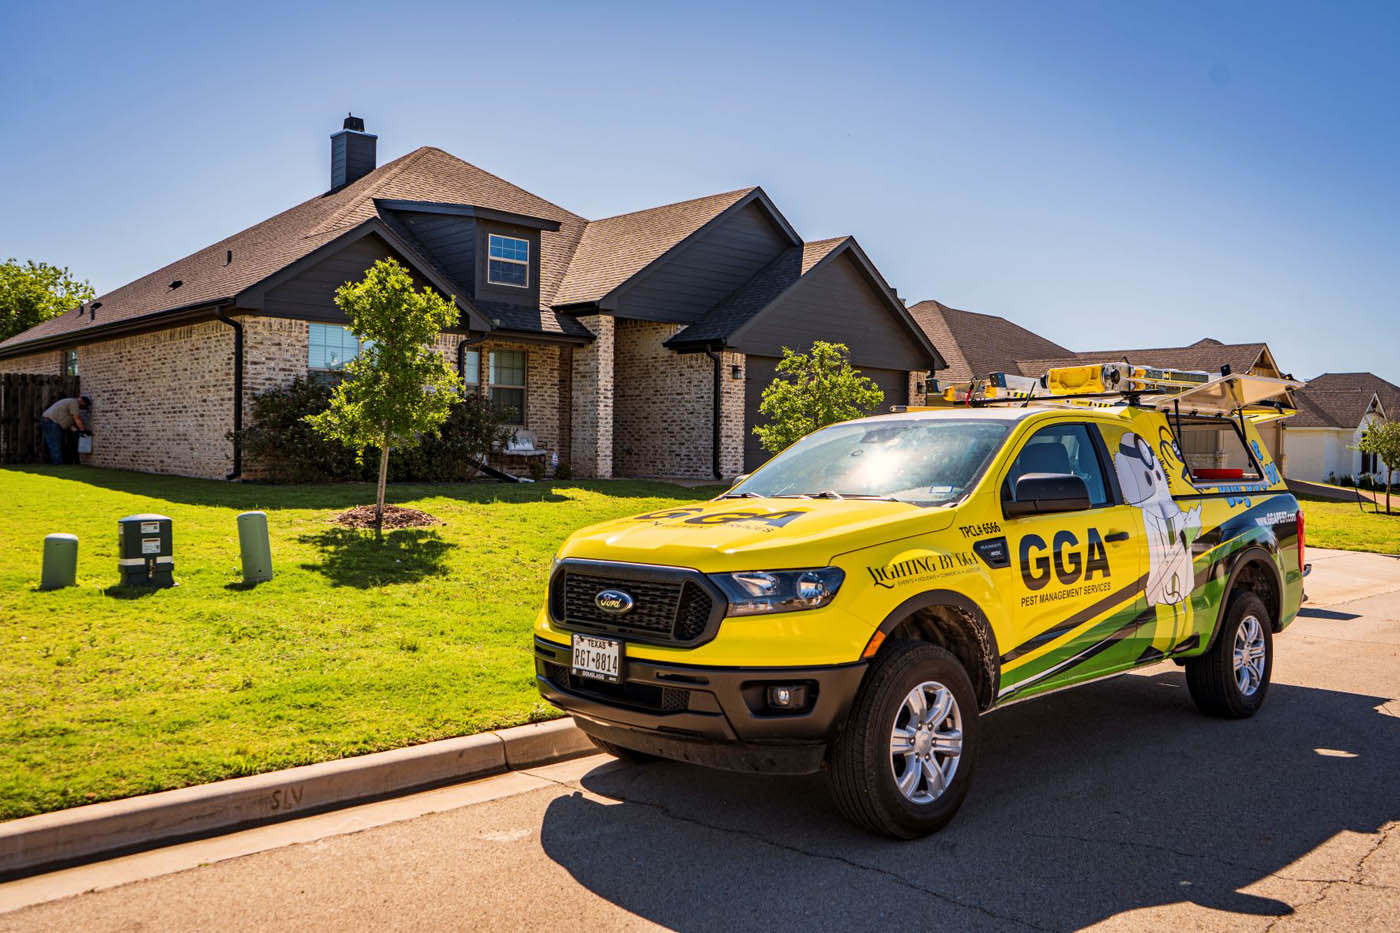 A GGA Pest Management vehicle, we are the one of the best pest control companies in Waco, TX.